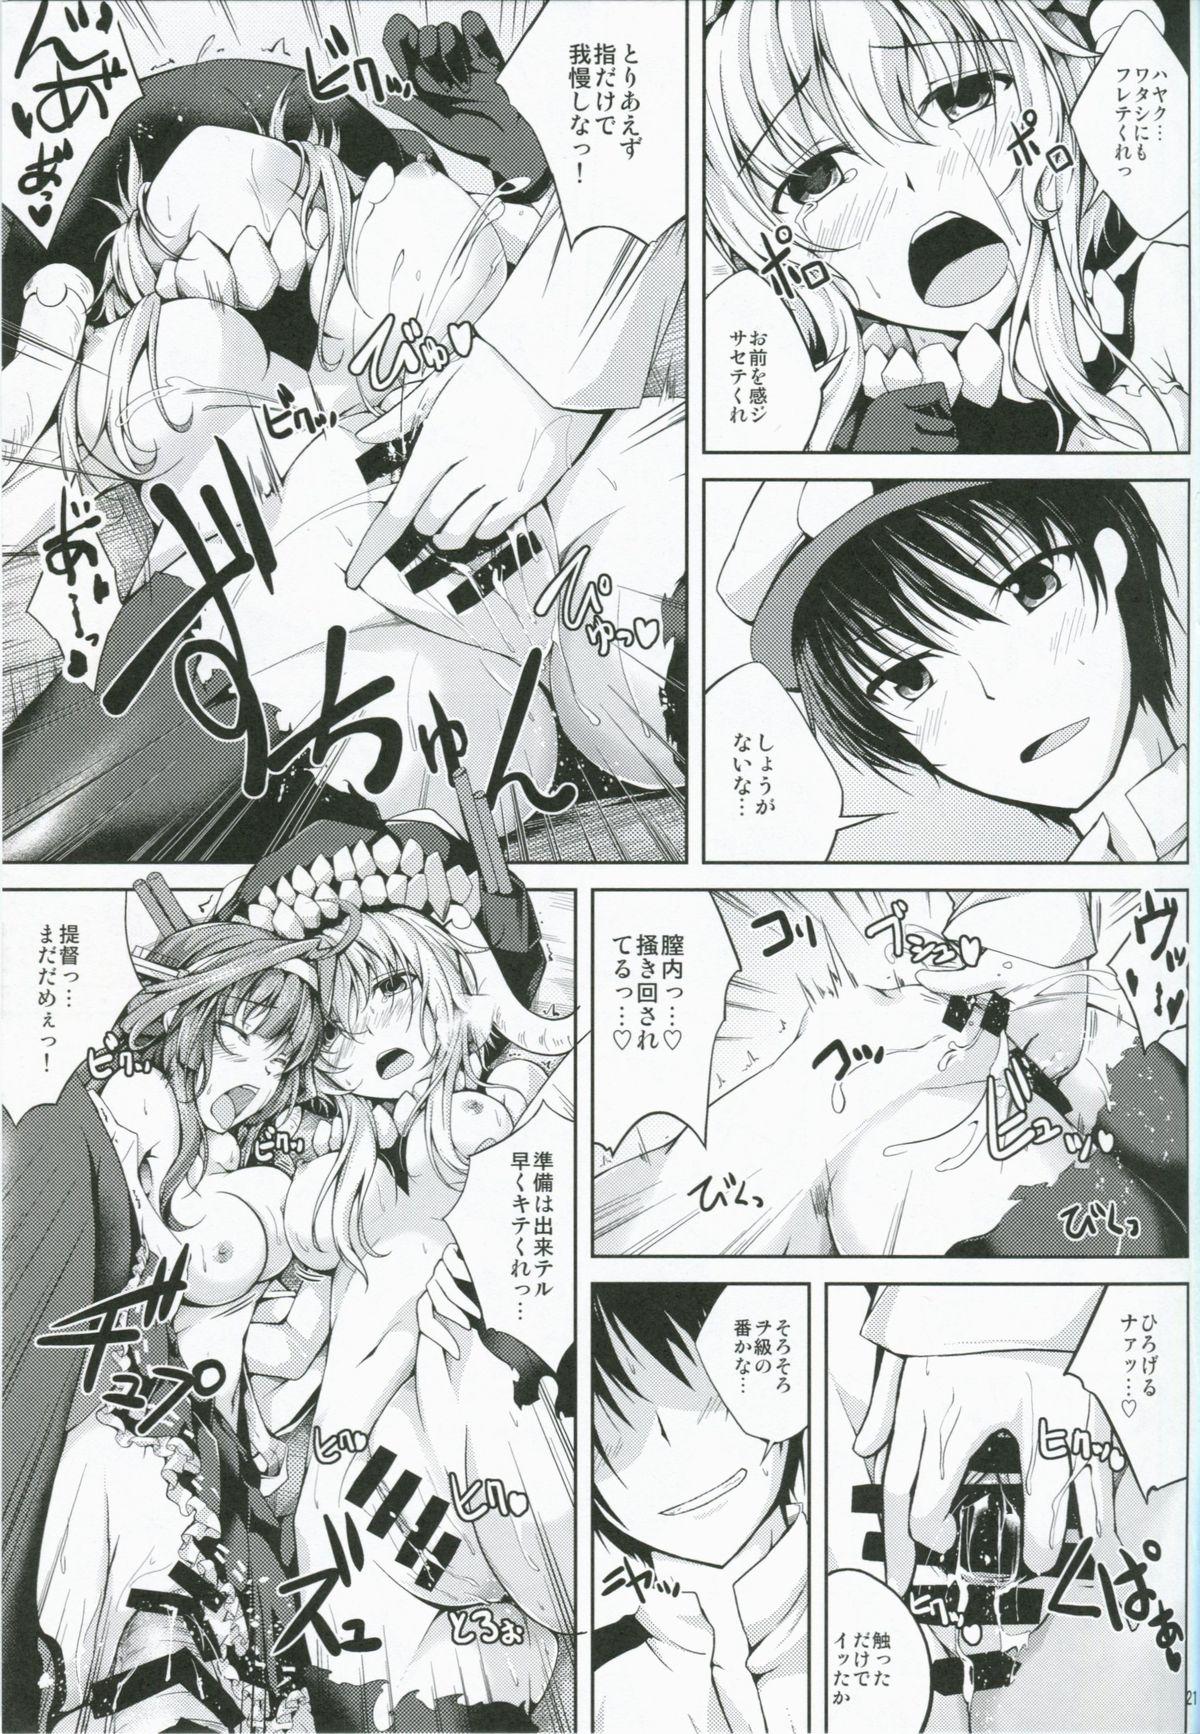 Love Making Koiiro Moyou 6 - Kantai collection 3some - Page 20